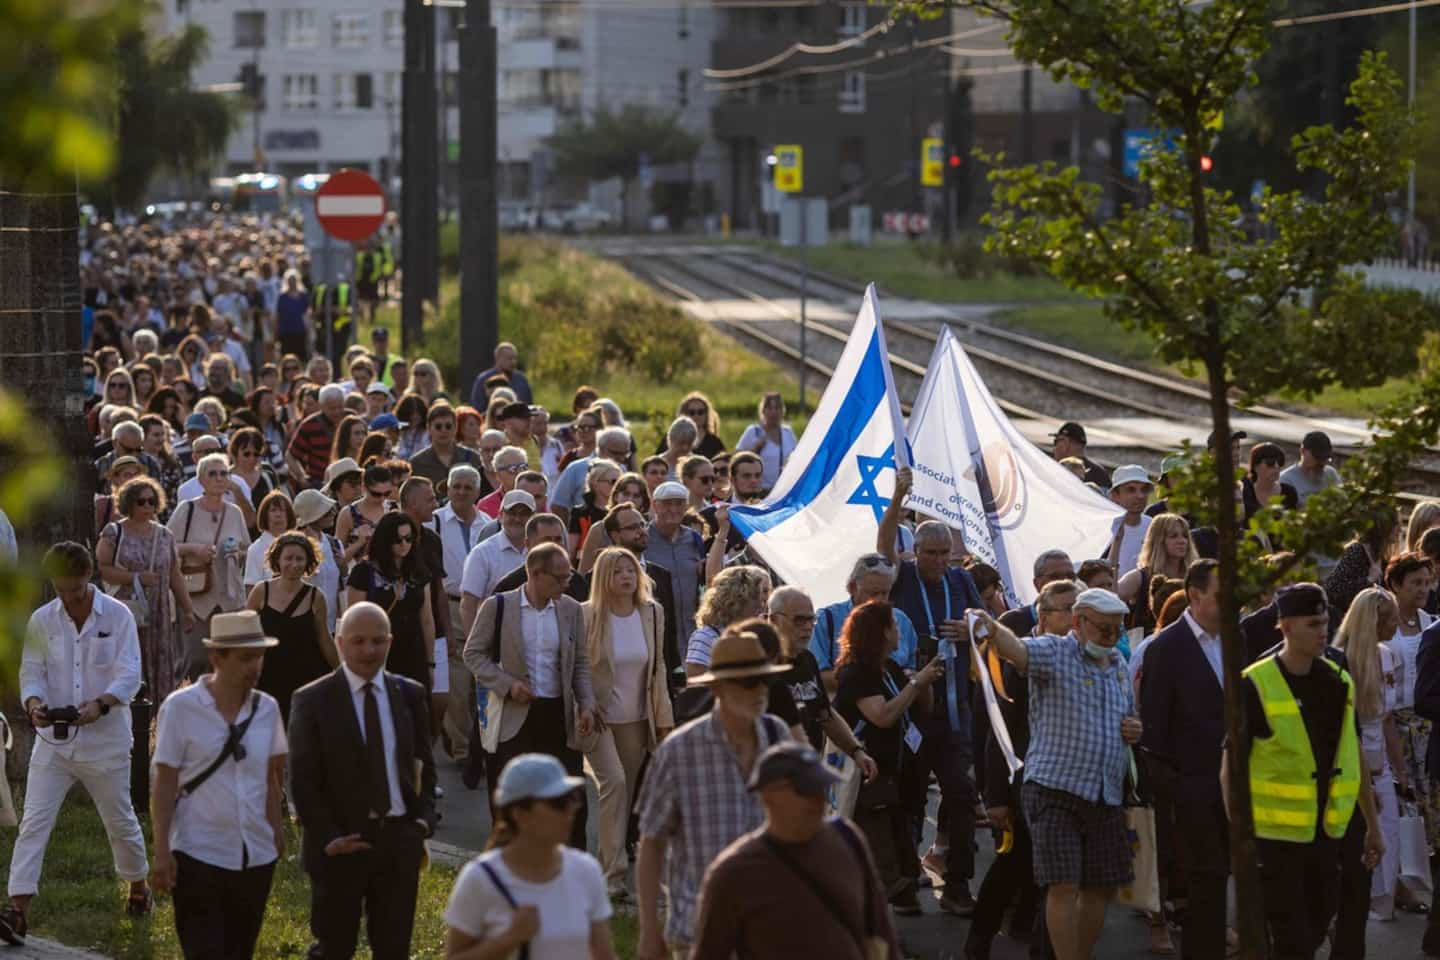 80 years later, commemoration in Warsaw of the liquidation of the Jewish ghetto by the Nazis